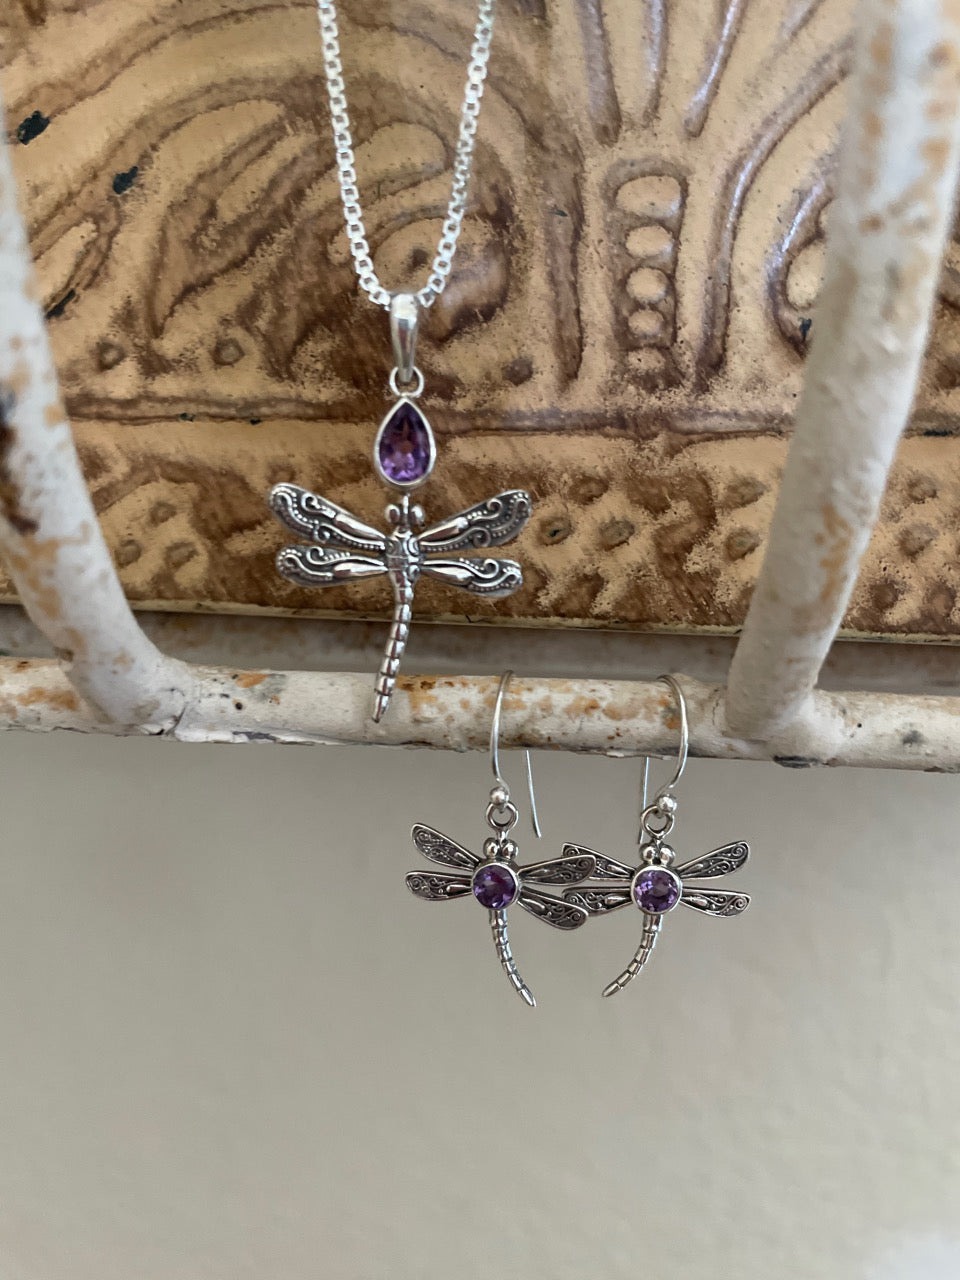 Dragon Fly Sterling Silver Pendant and Earring set adorned with Amethysts